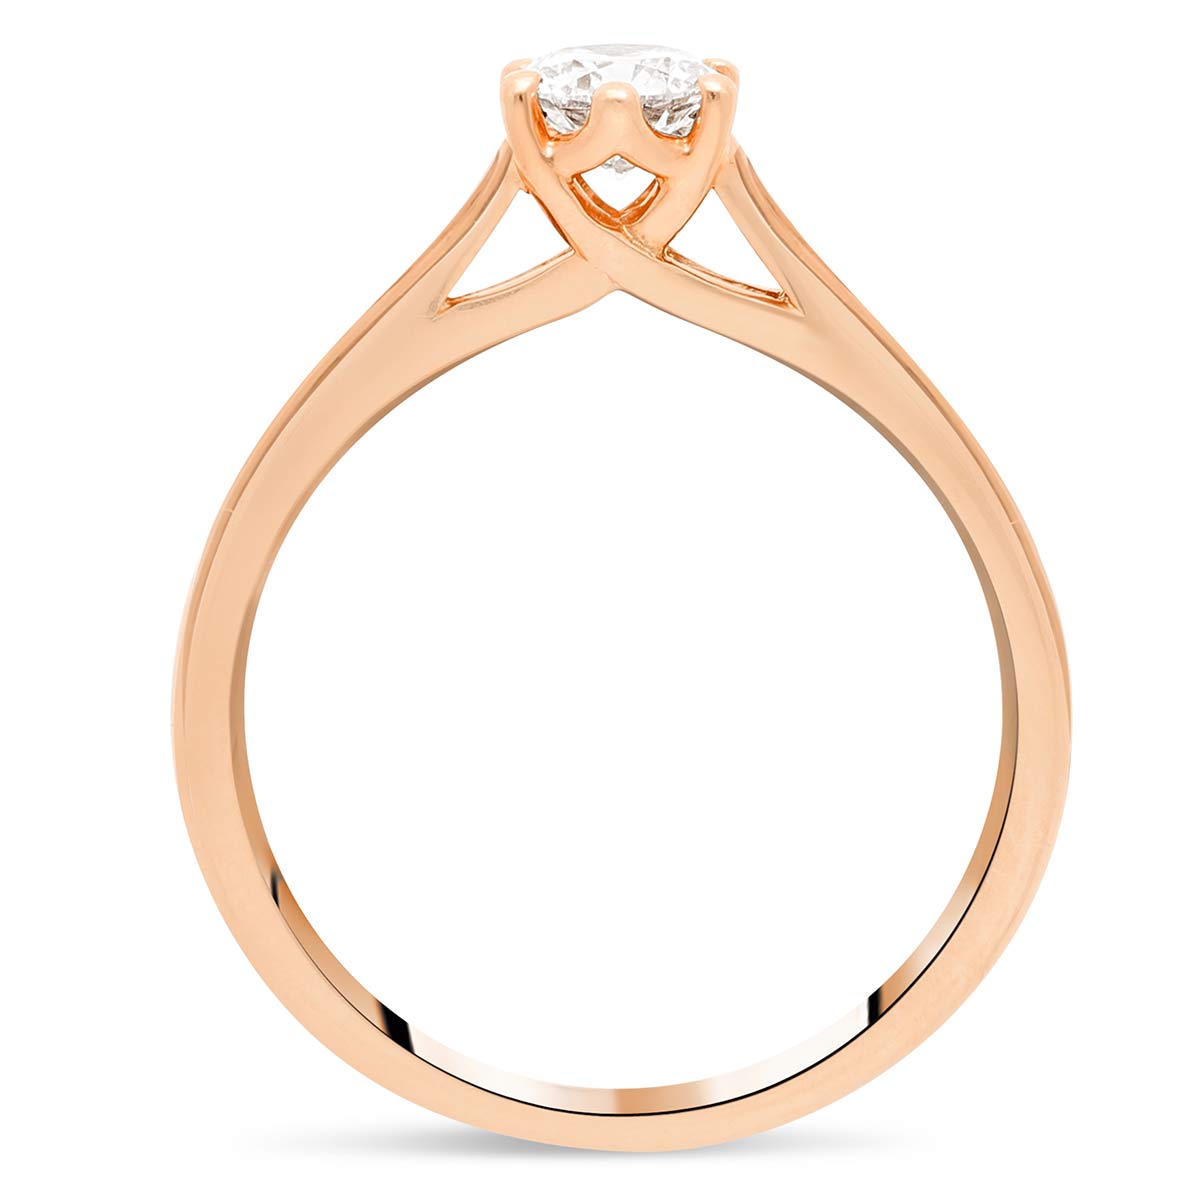 tahaa-or-solitaires-diamants-certifies-style-classique-or-rose-750-